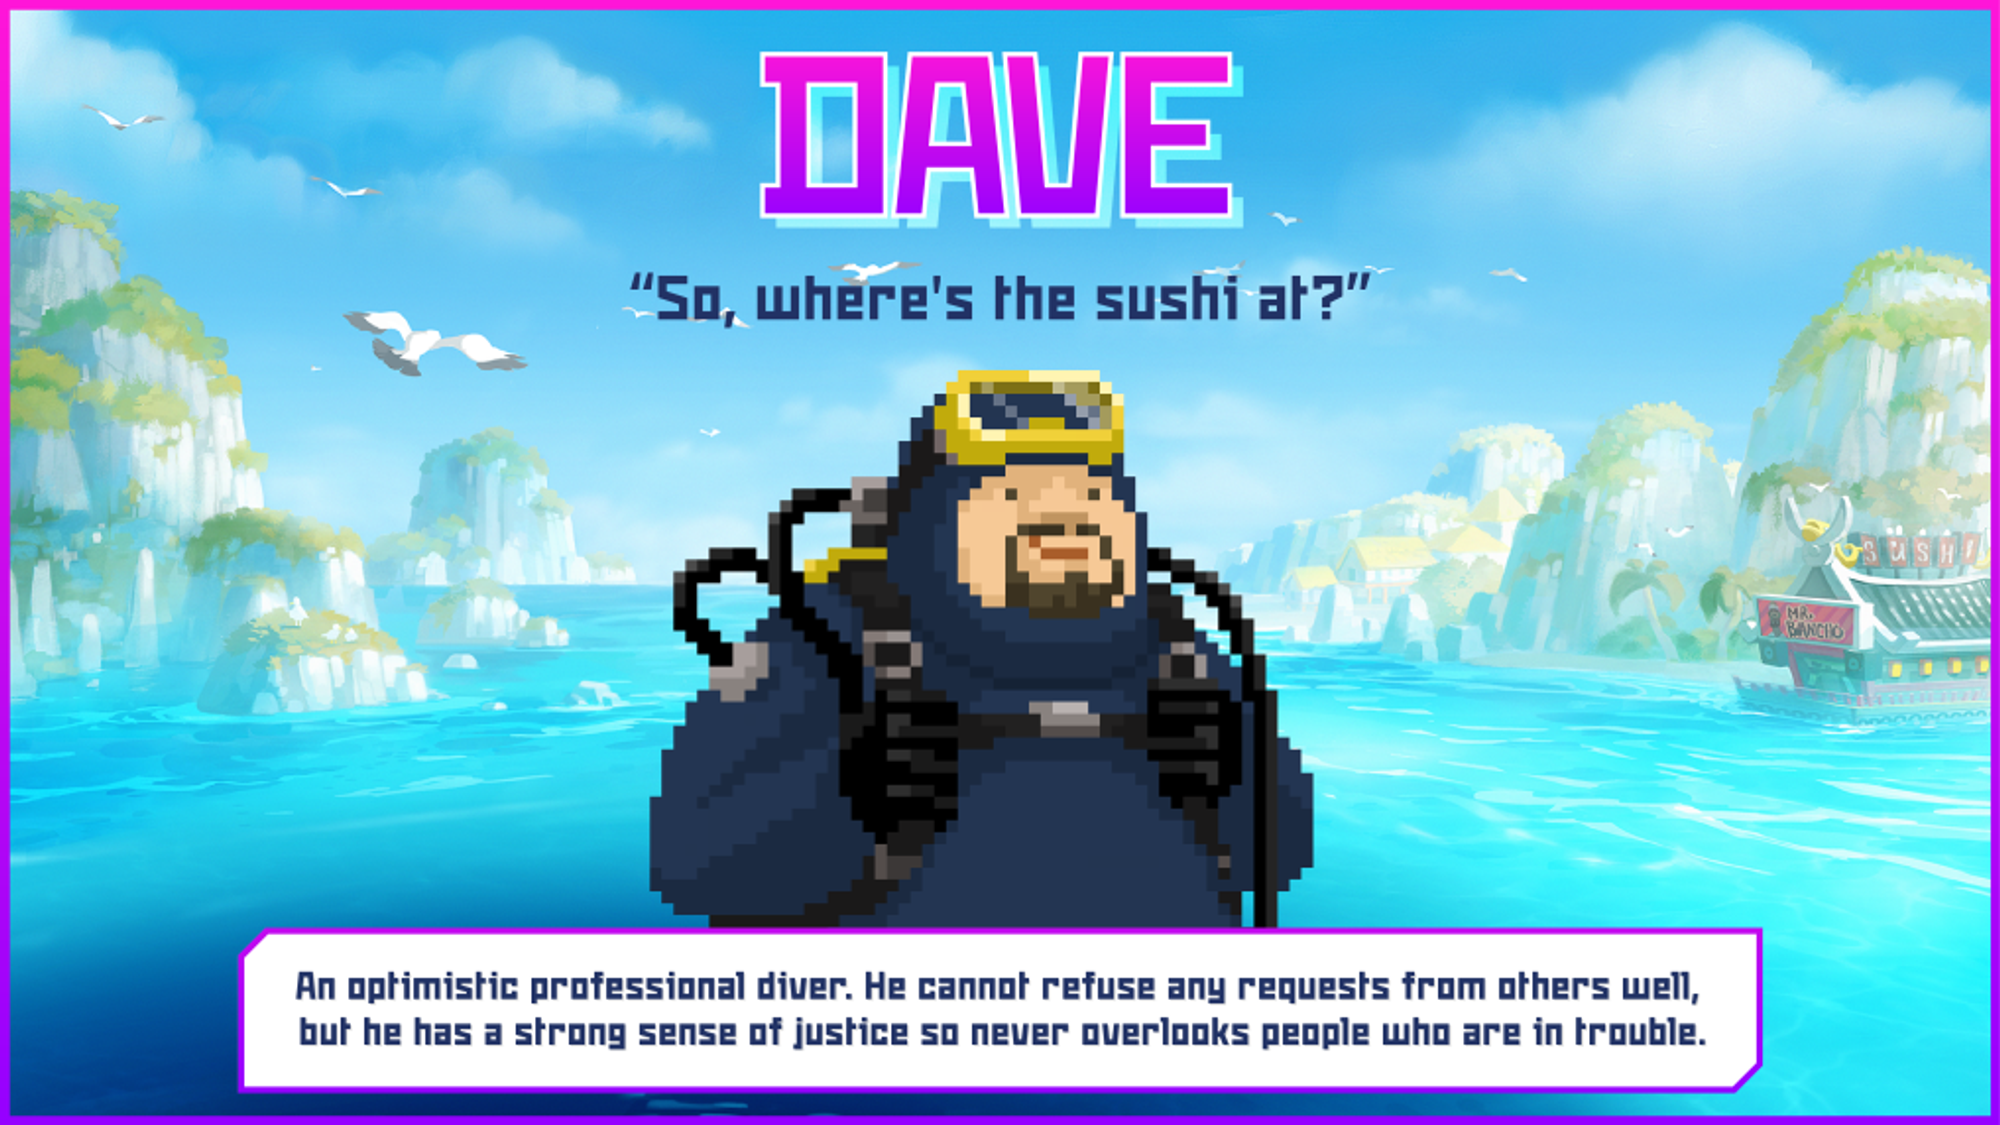 dave the diver dave